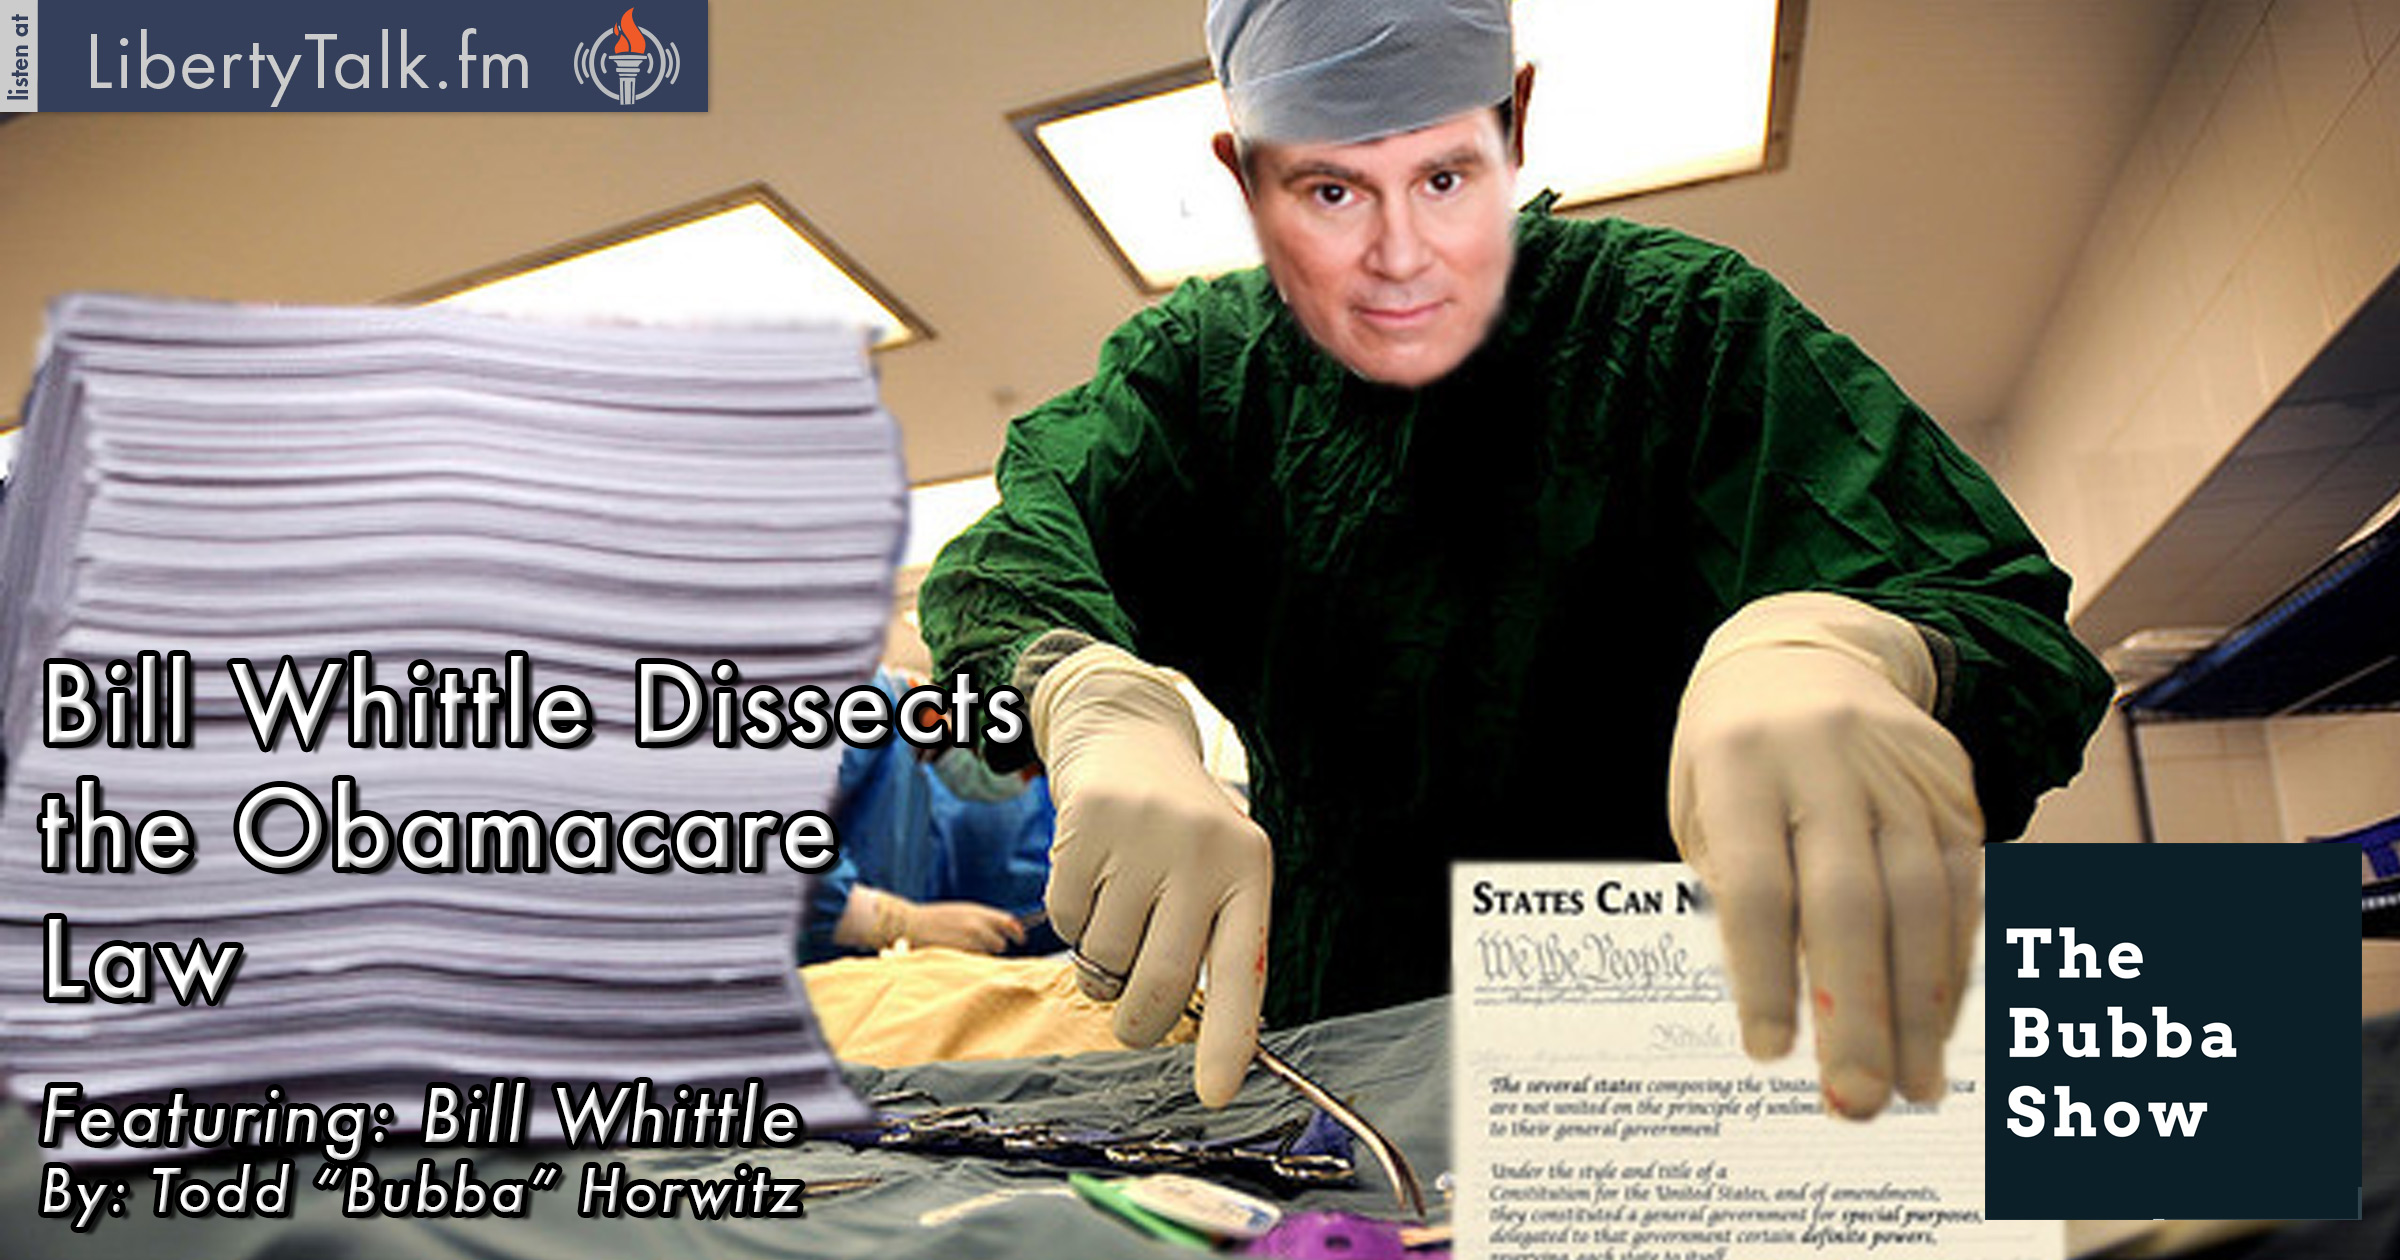 Bill Whittle Dissects the Obamacare Law